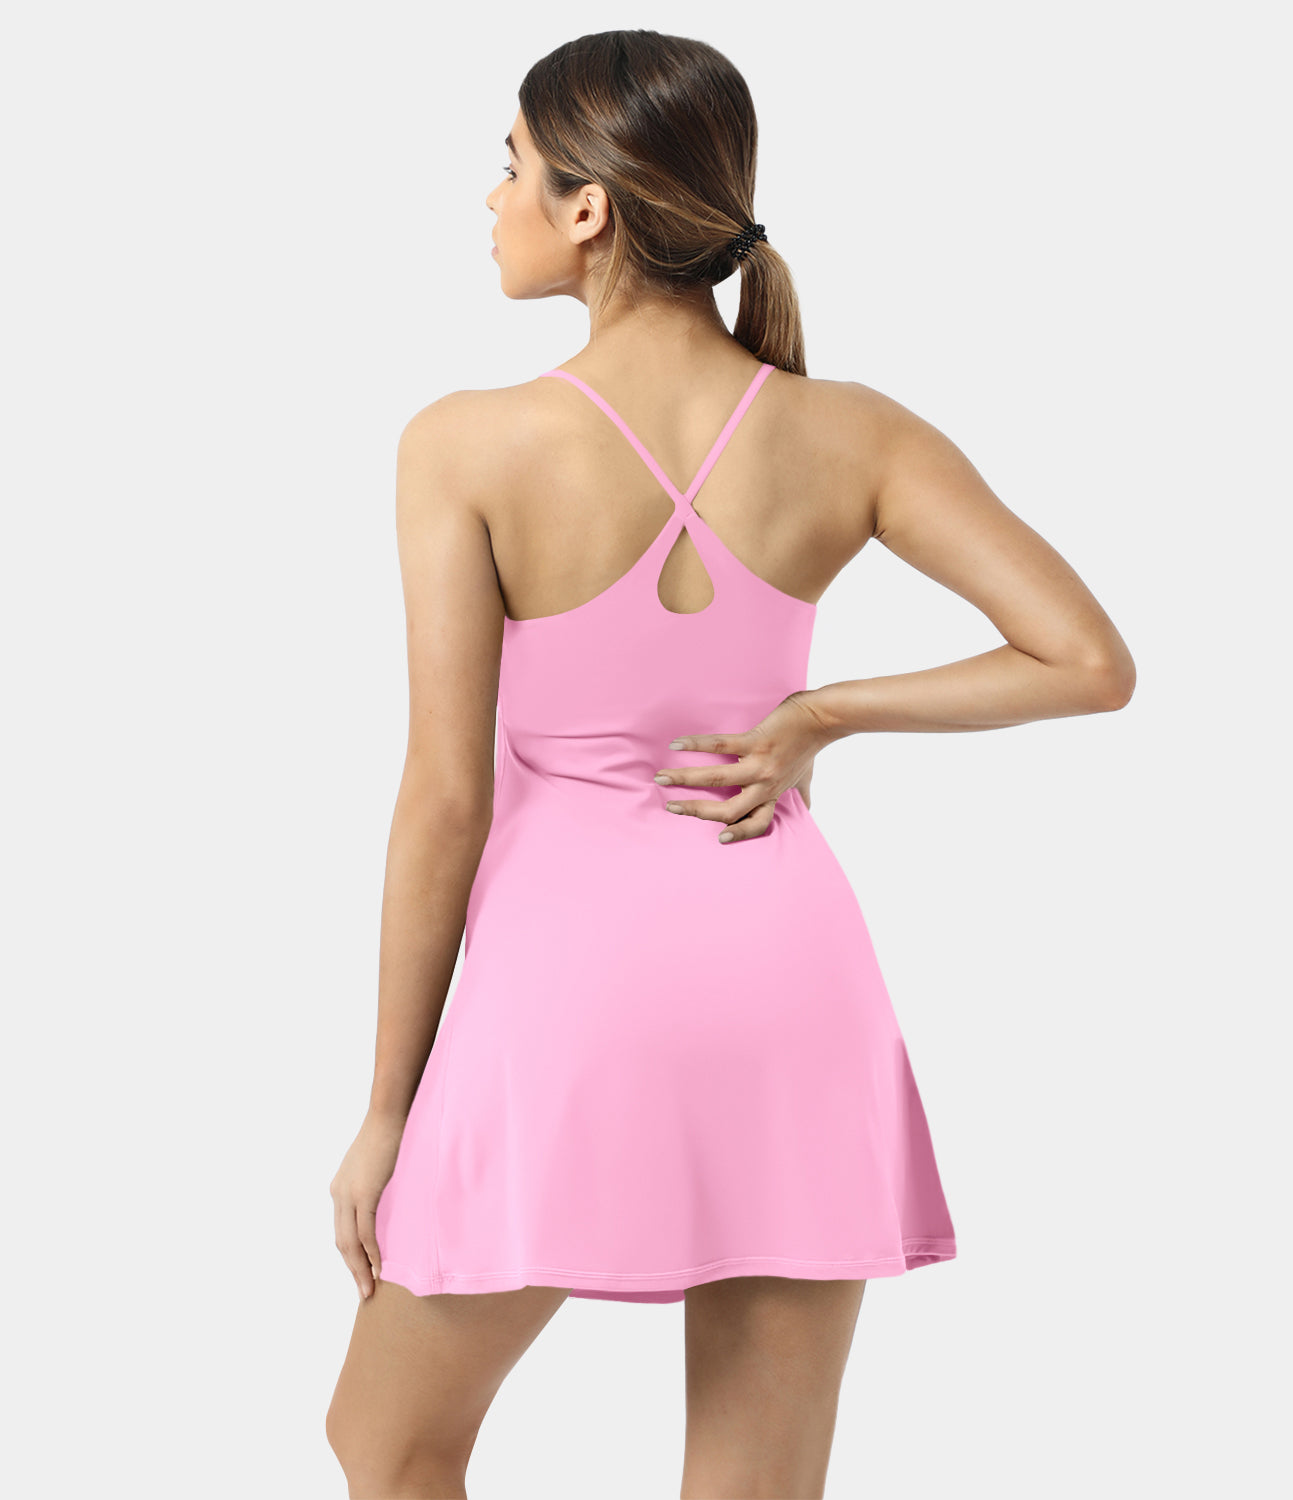 

Halara Everyday Cloudfulв„ў Backless 2-in-1 Flare Workout Dress-Wannabe Workout Dress - Nosegay